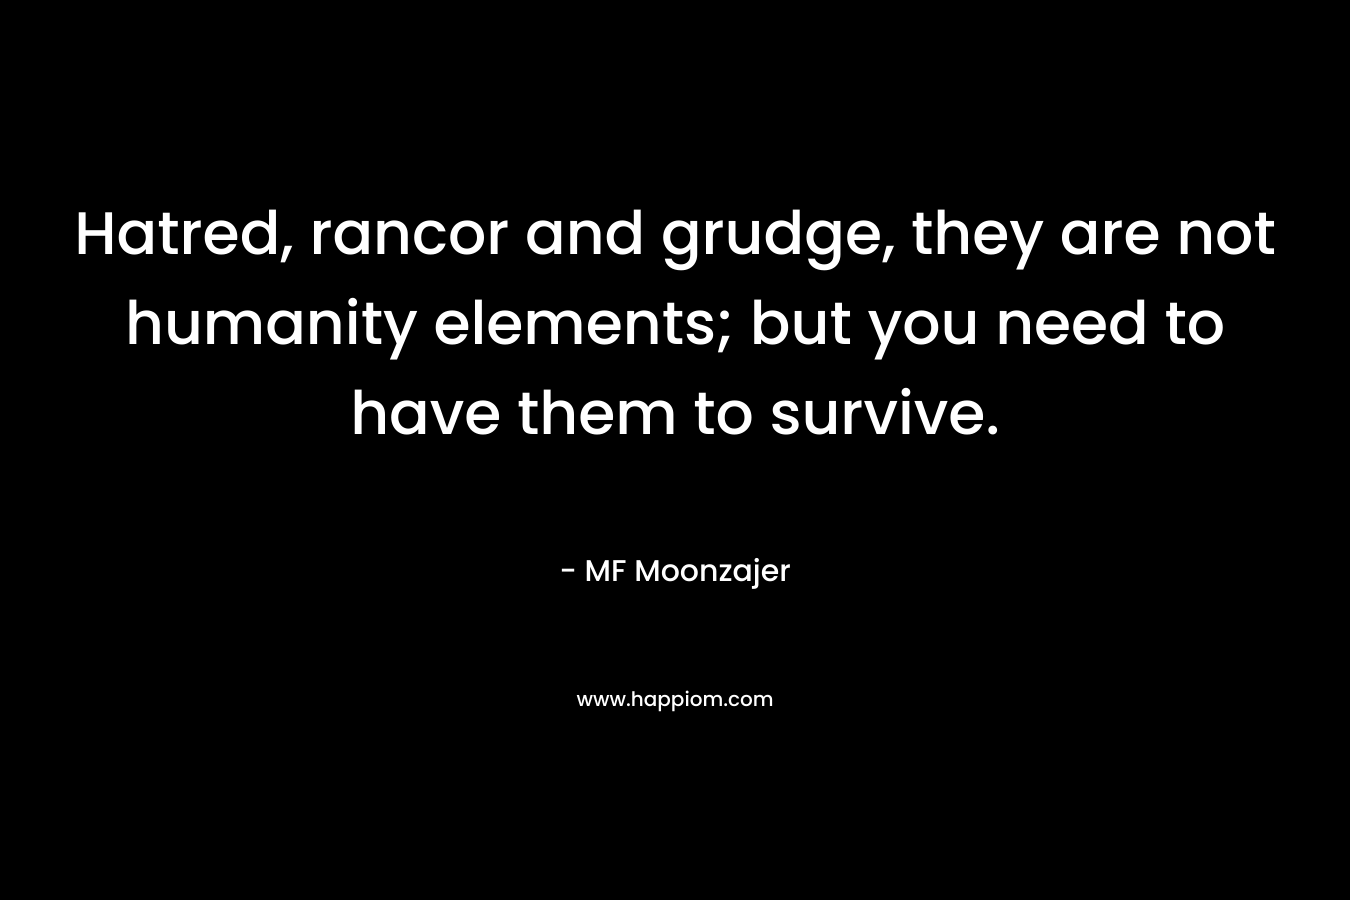 Hatred, rancor and grudge, they are not humanity elements; but you need to have them to survive. – MF Moonzajer